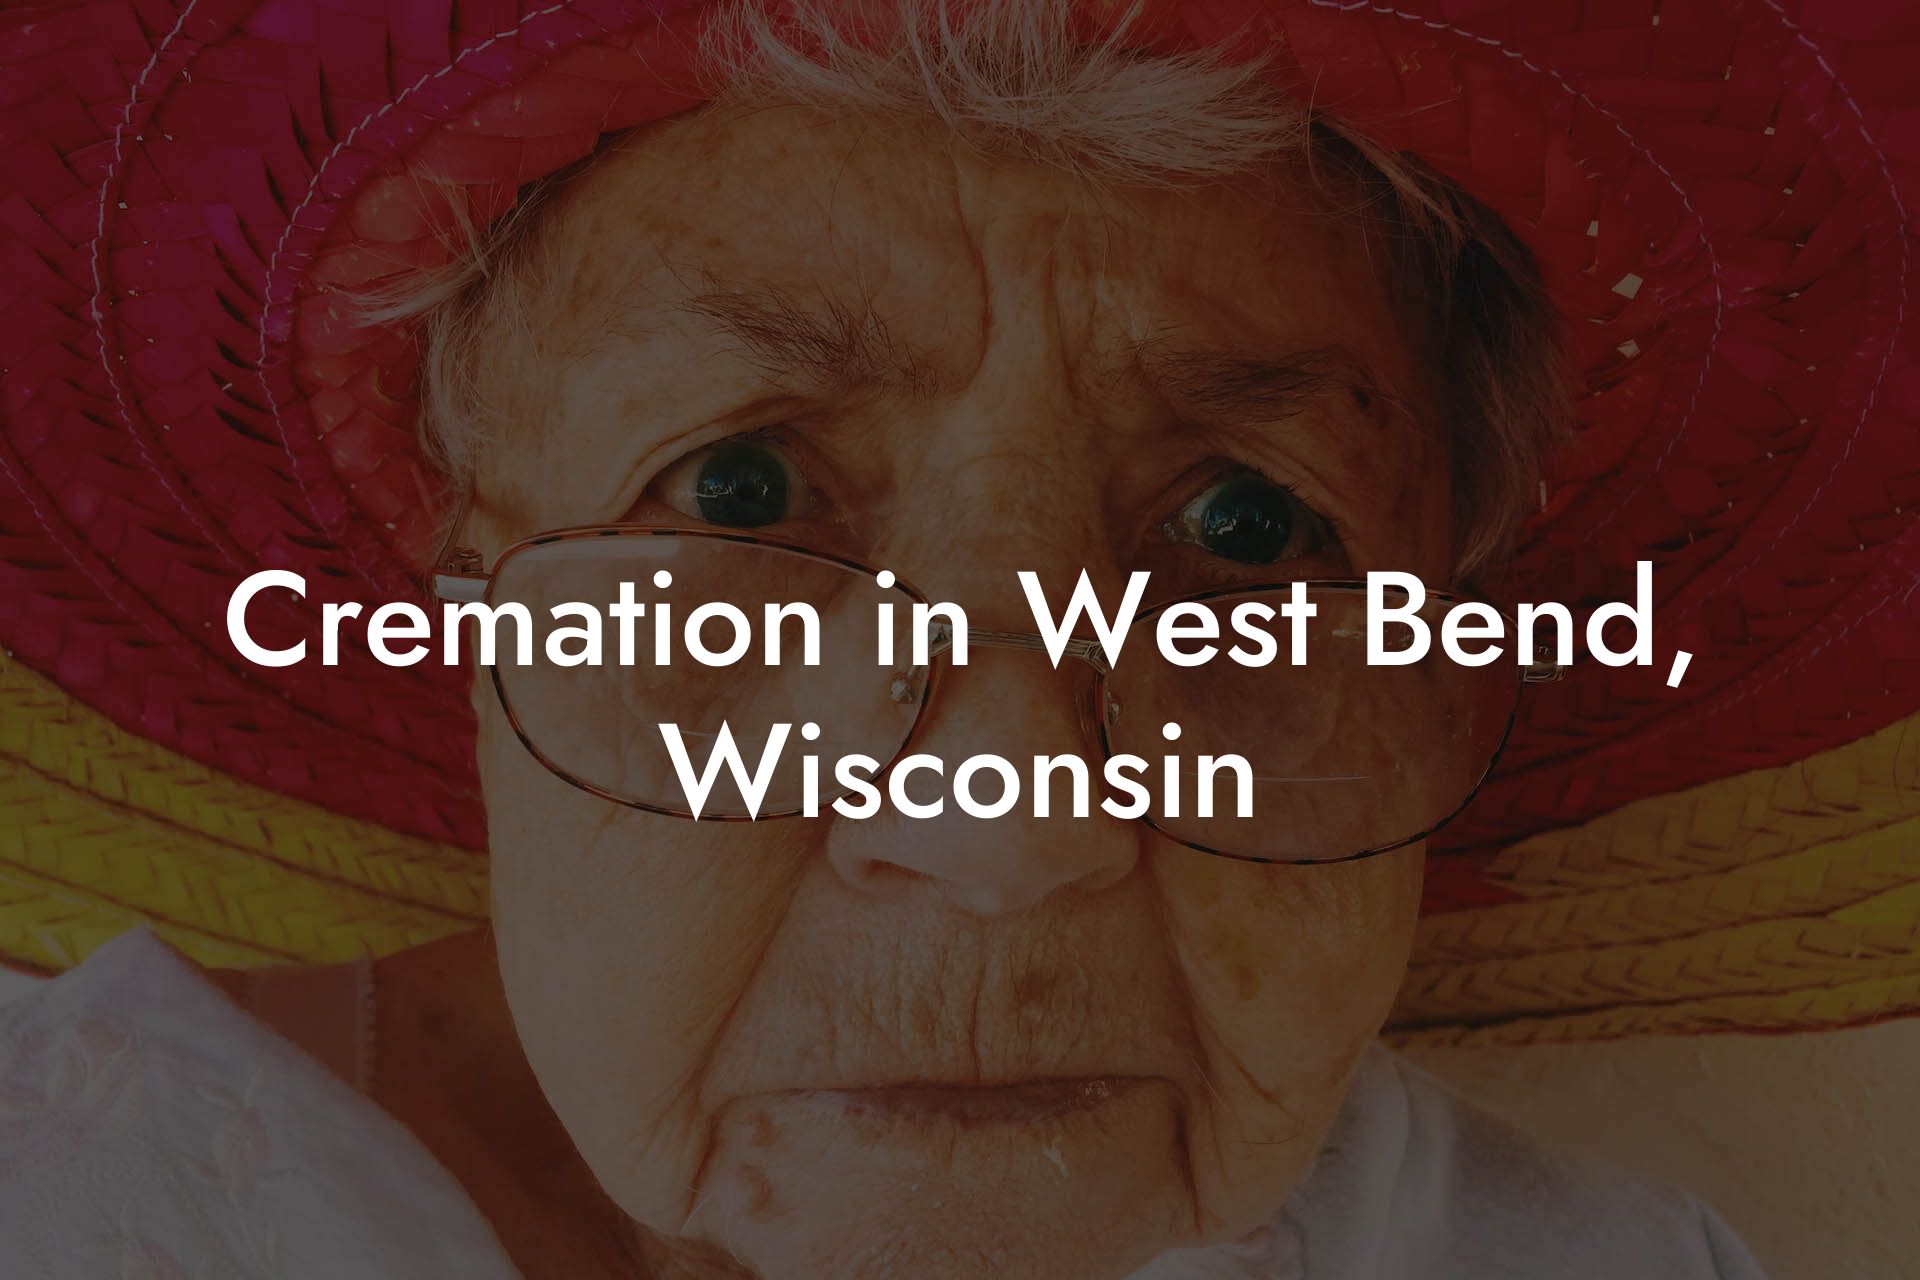 Cremation in West Bend, Wisconsin